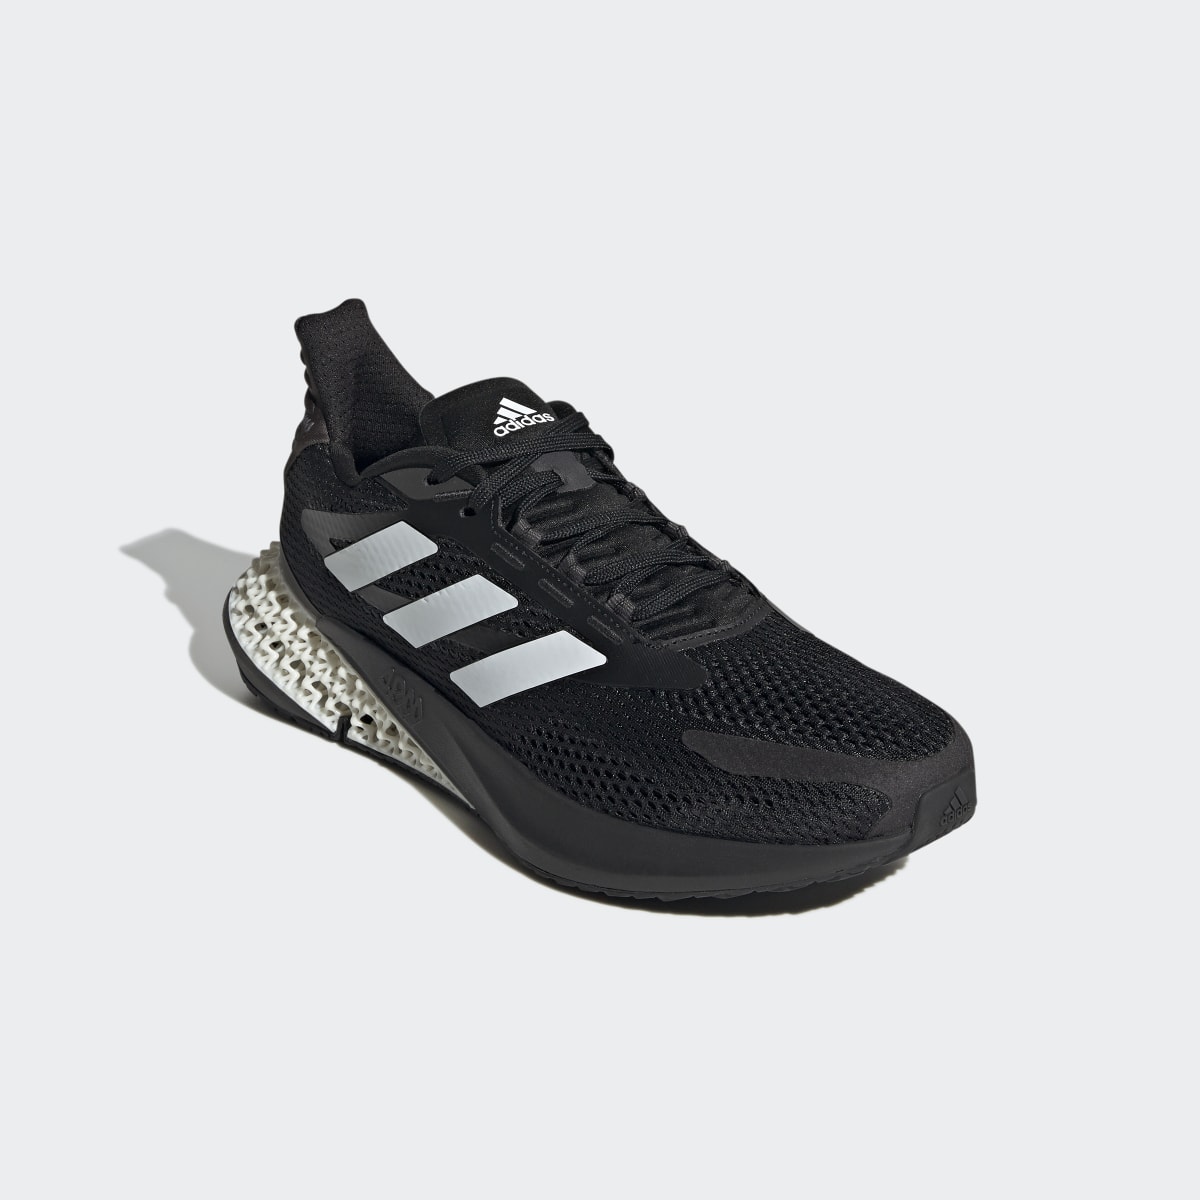 Adidas 4DFWD Pulse Shoes. 6